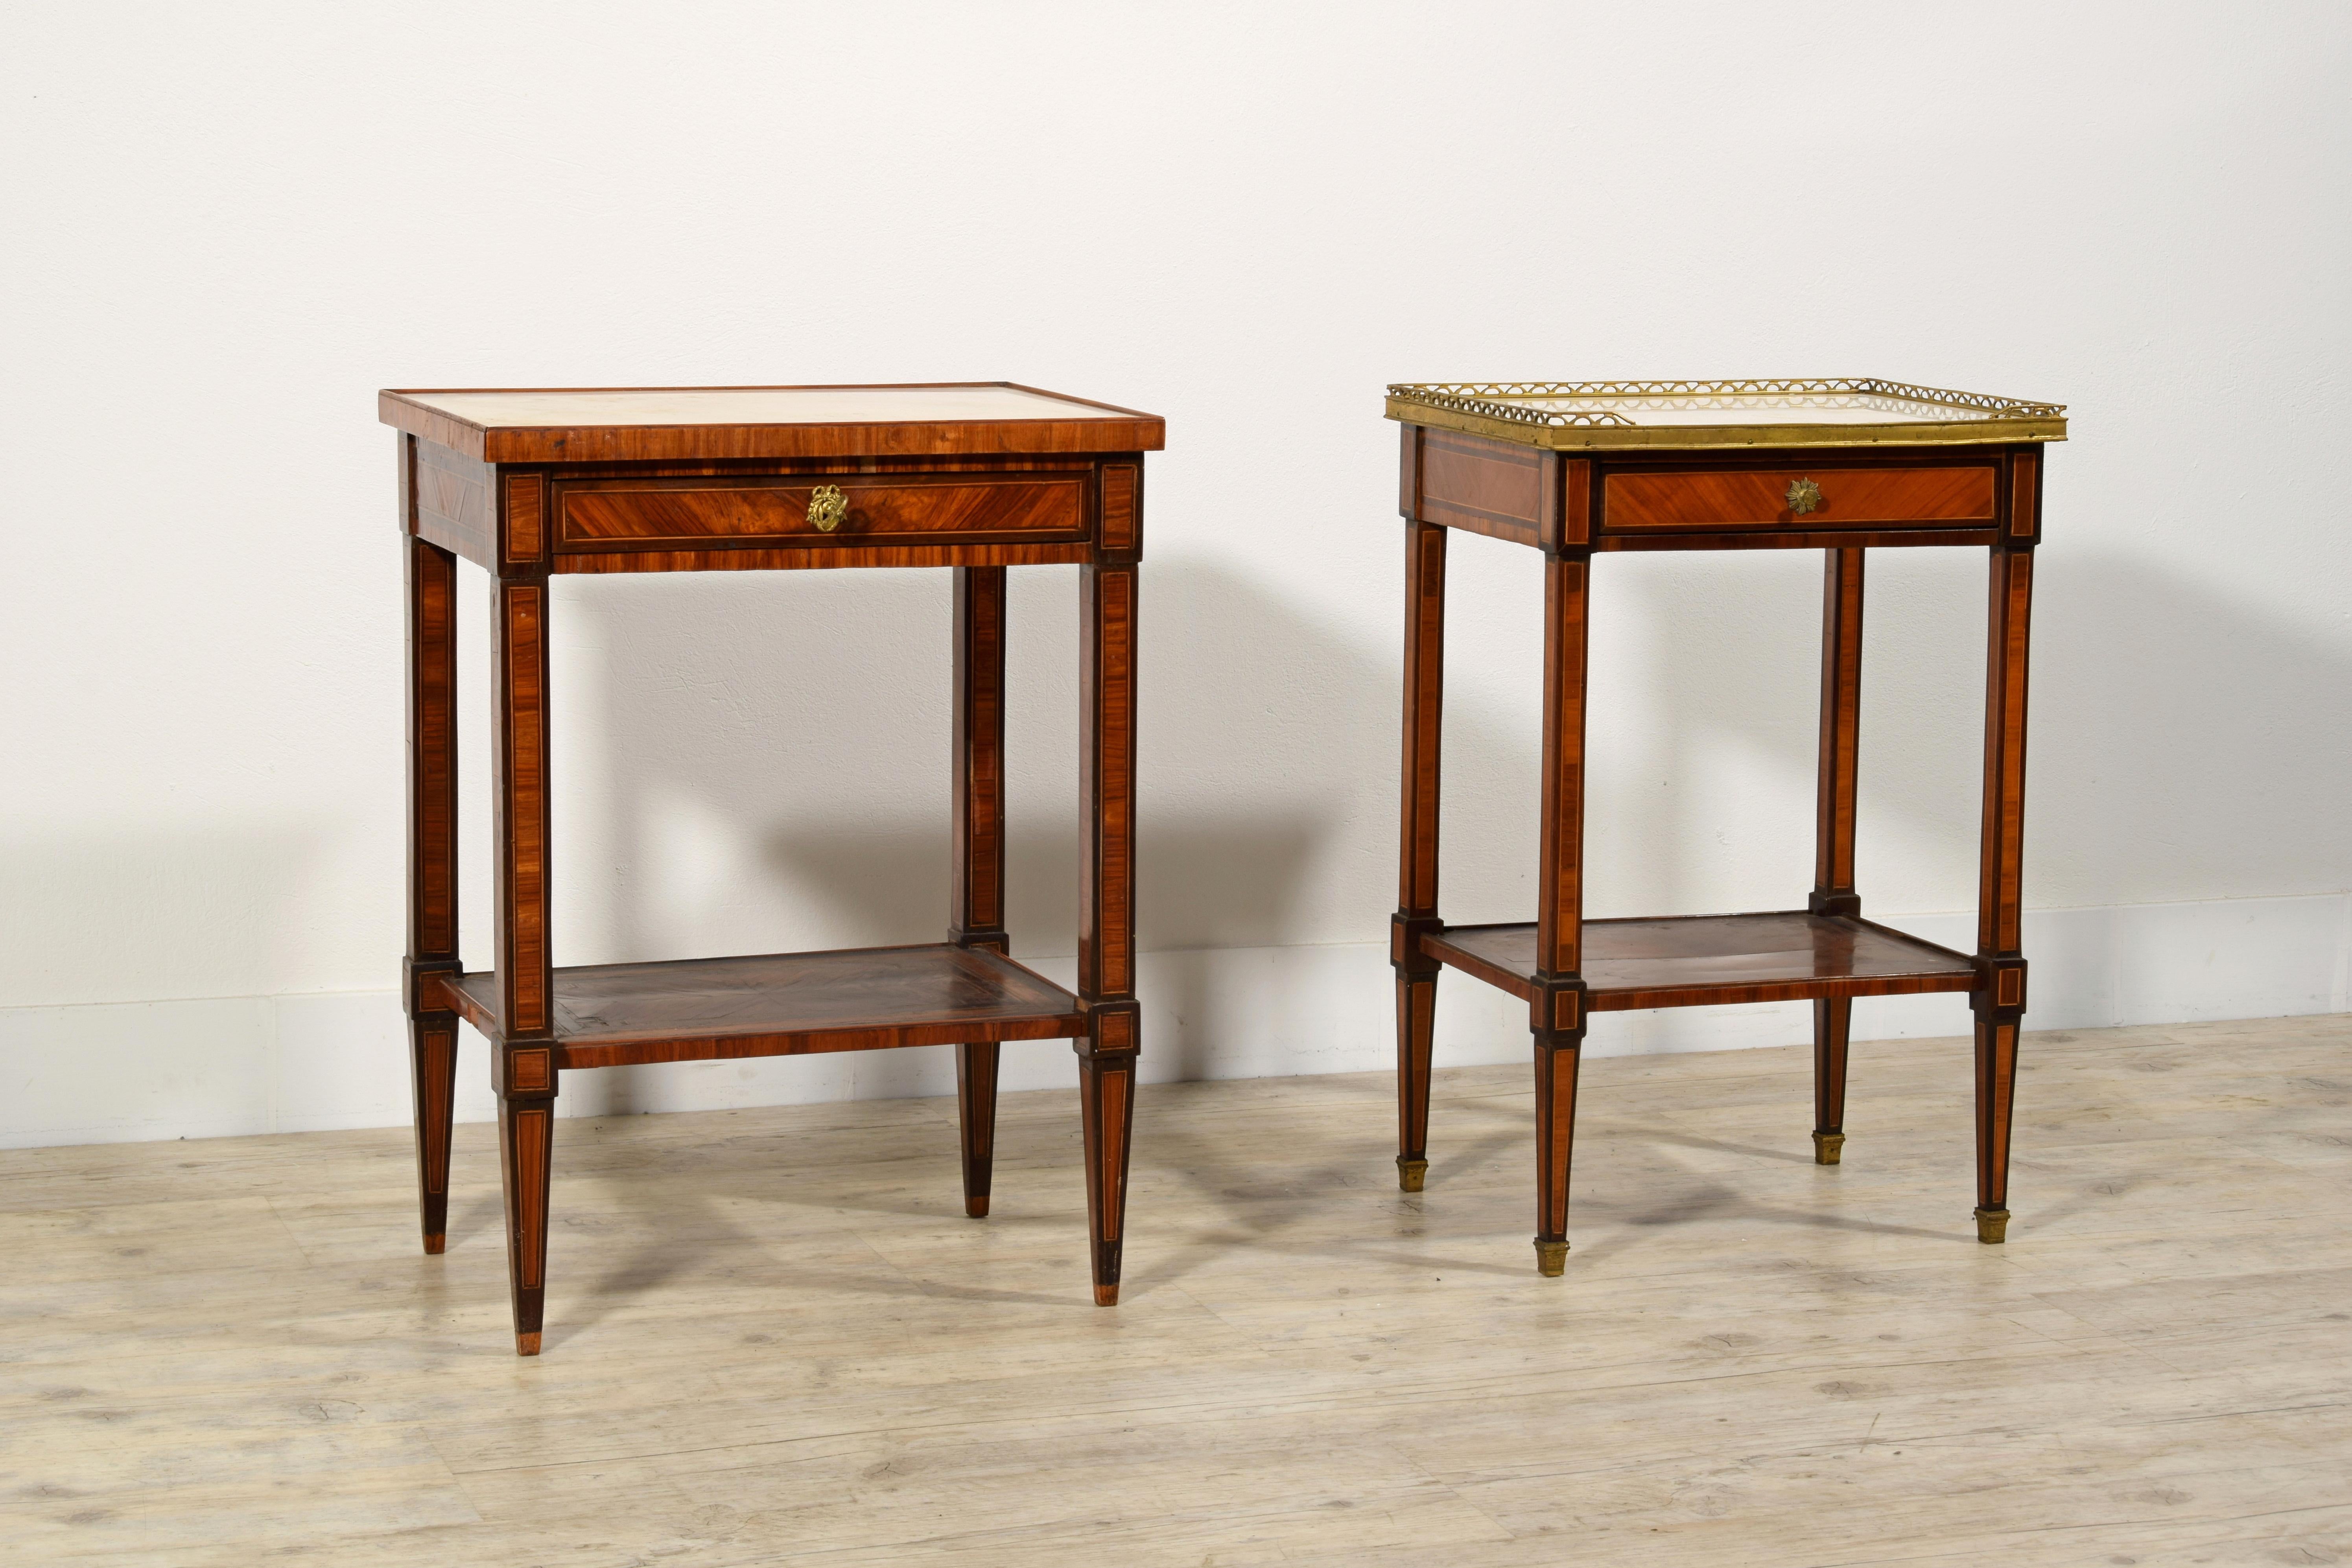 Two Louis XVI center tables in veneered wood, marble top and gilded bronze finishes, France, second half of the 18th century

Measurements: left side table: cm L 49 x P 35 x H 65; right side table: cm L 42 x P 34 x H 66

These two coffee tables